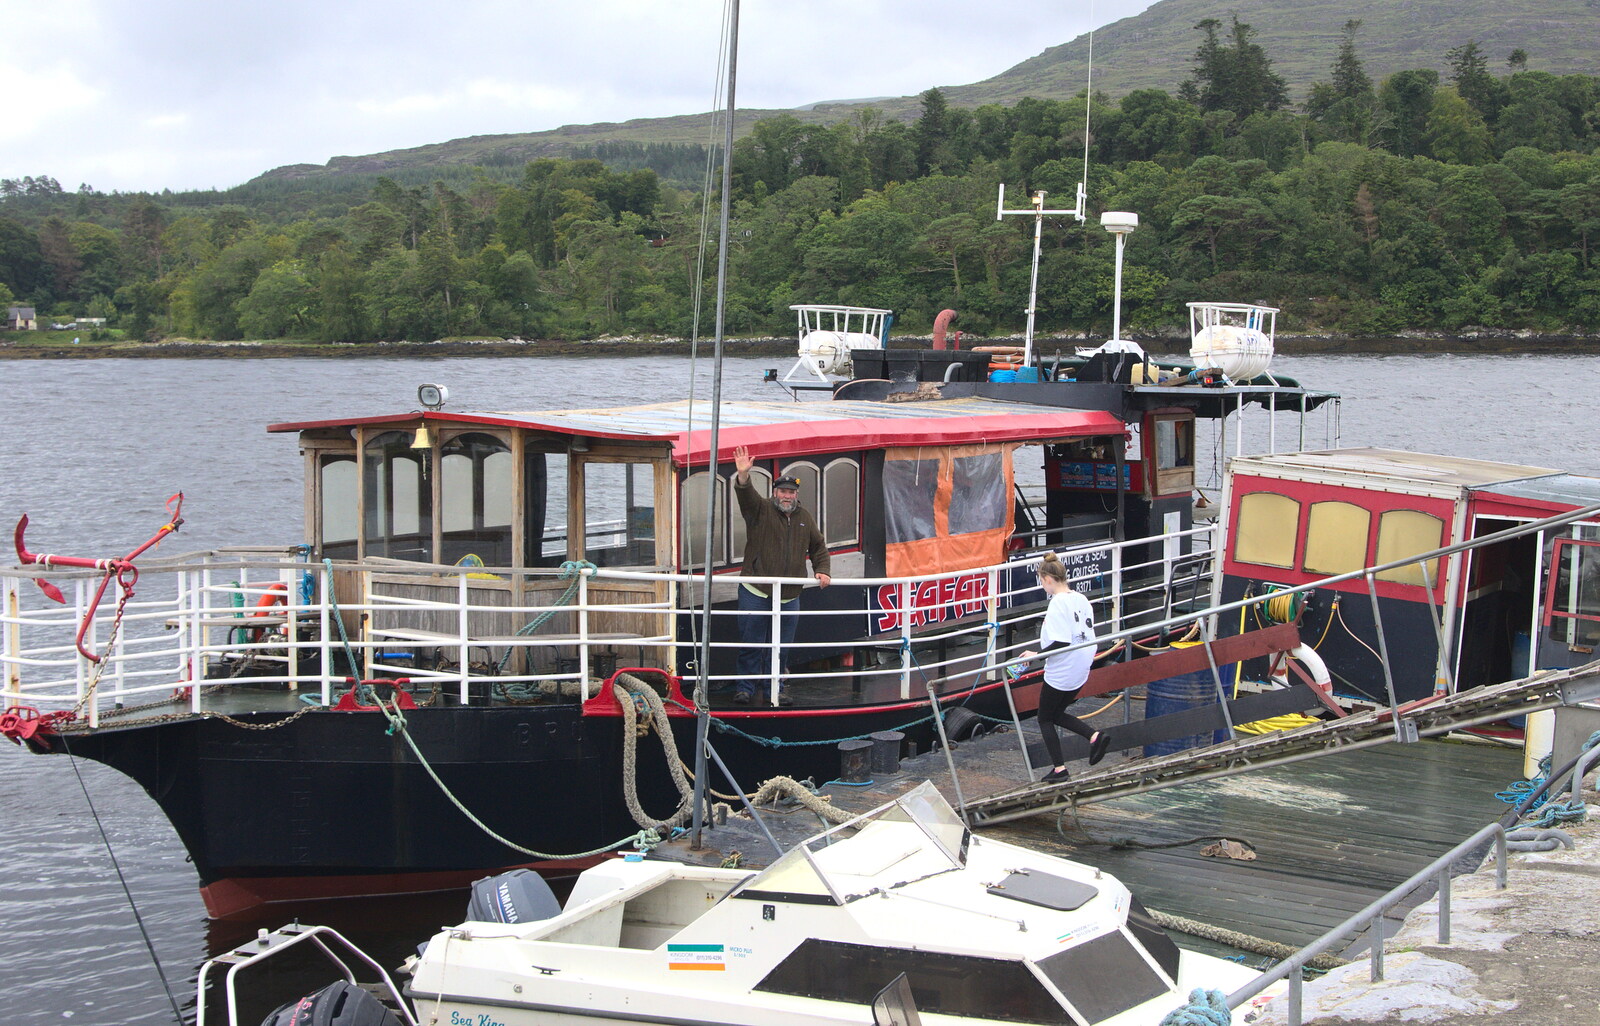 The captain waves us off from A Seafari Boat Trip, Kenmare, Kerry, Ireland - 3rd August 2017